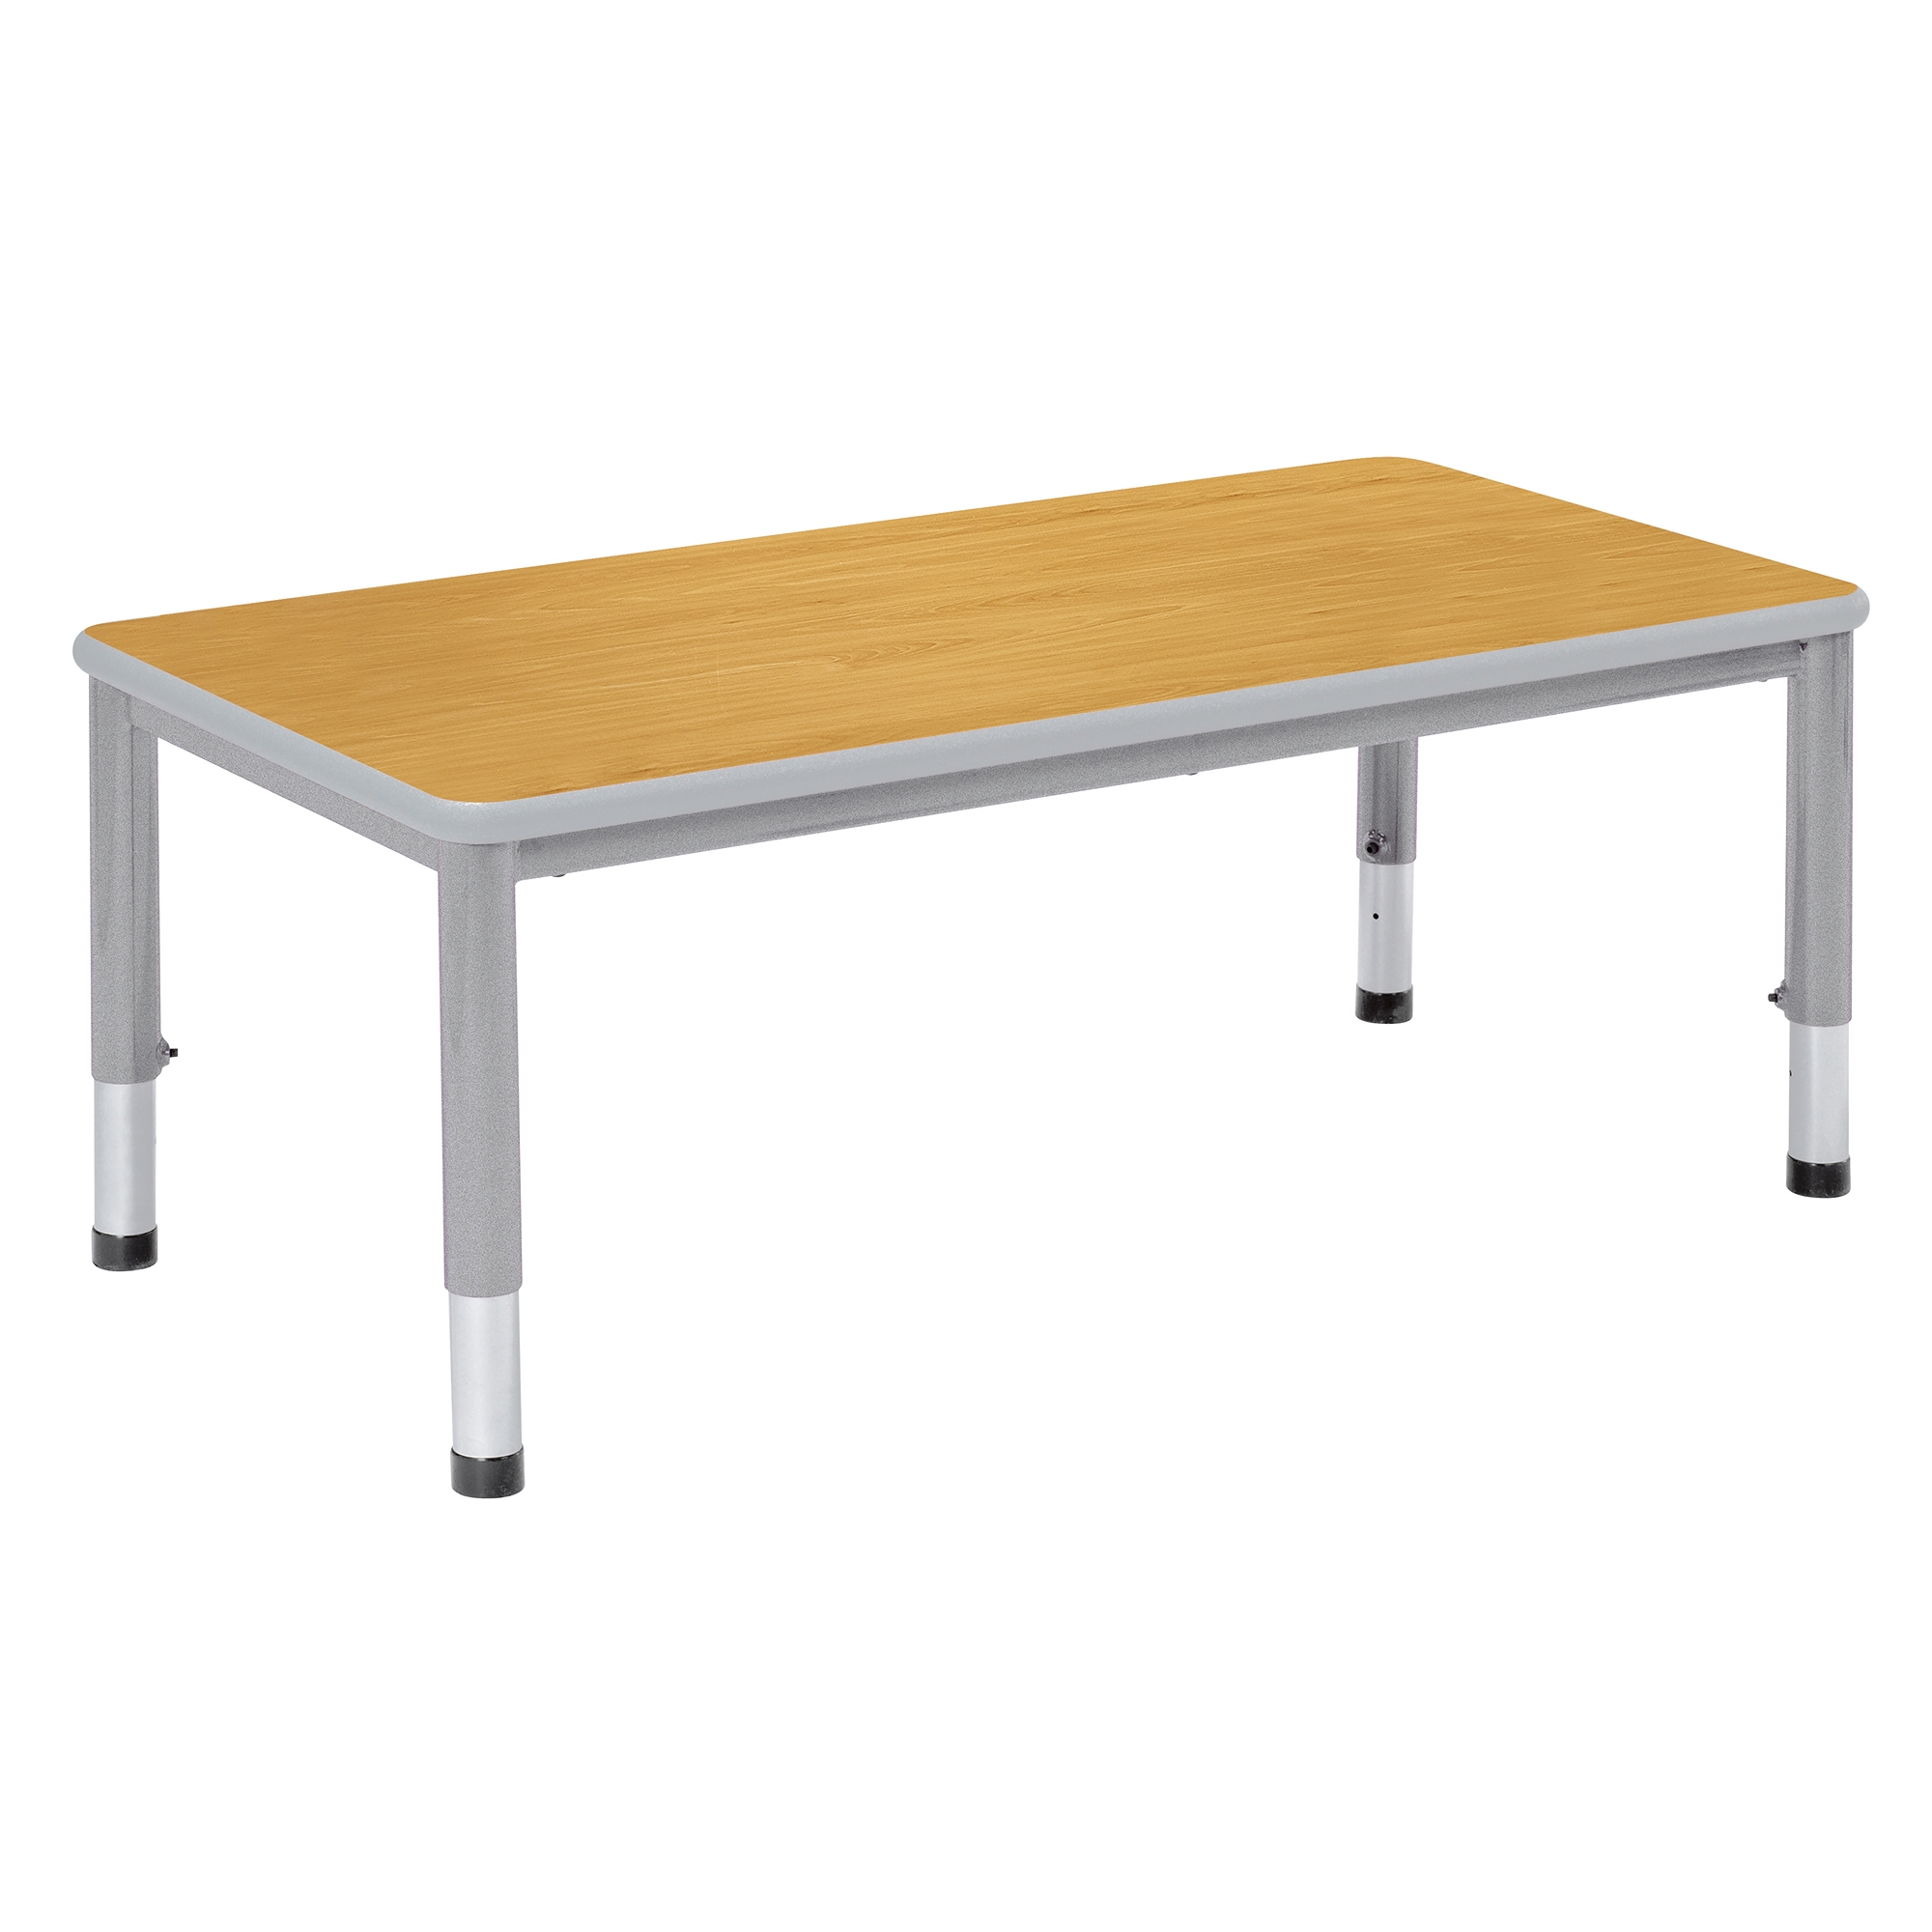 Harlequin Large Rect Table Beech